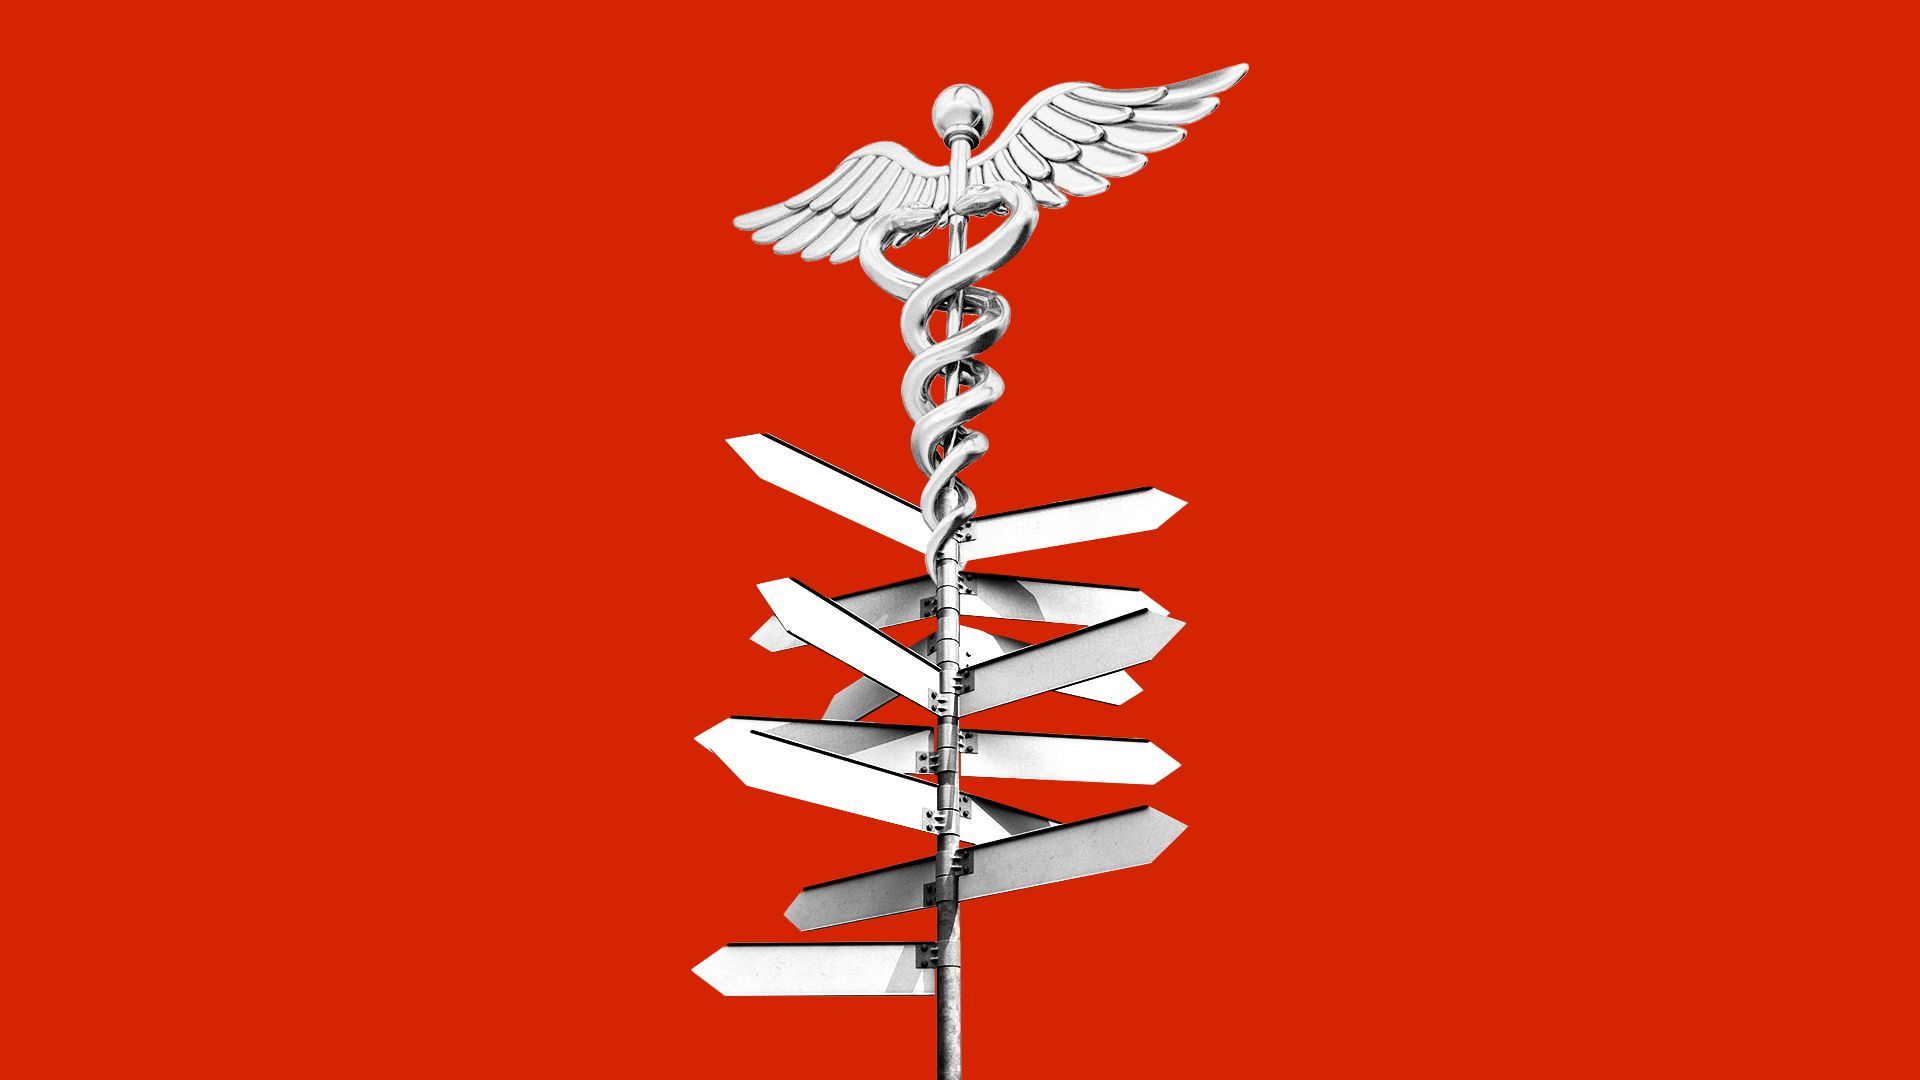 Illustration of a street sign pointing many directions with a caduceus at the top